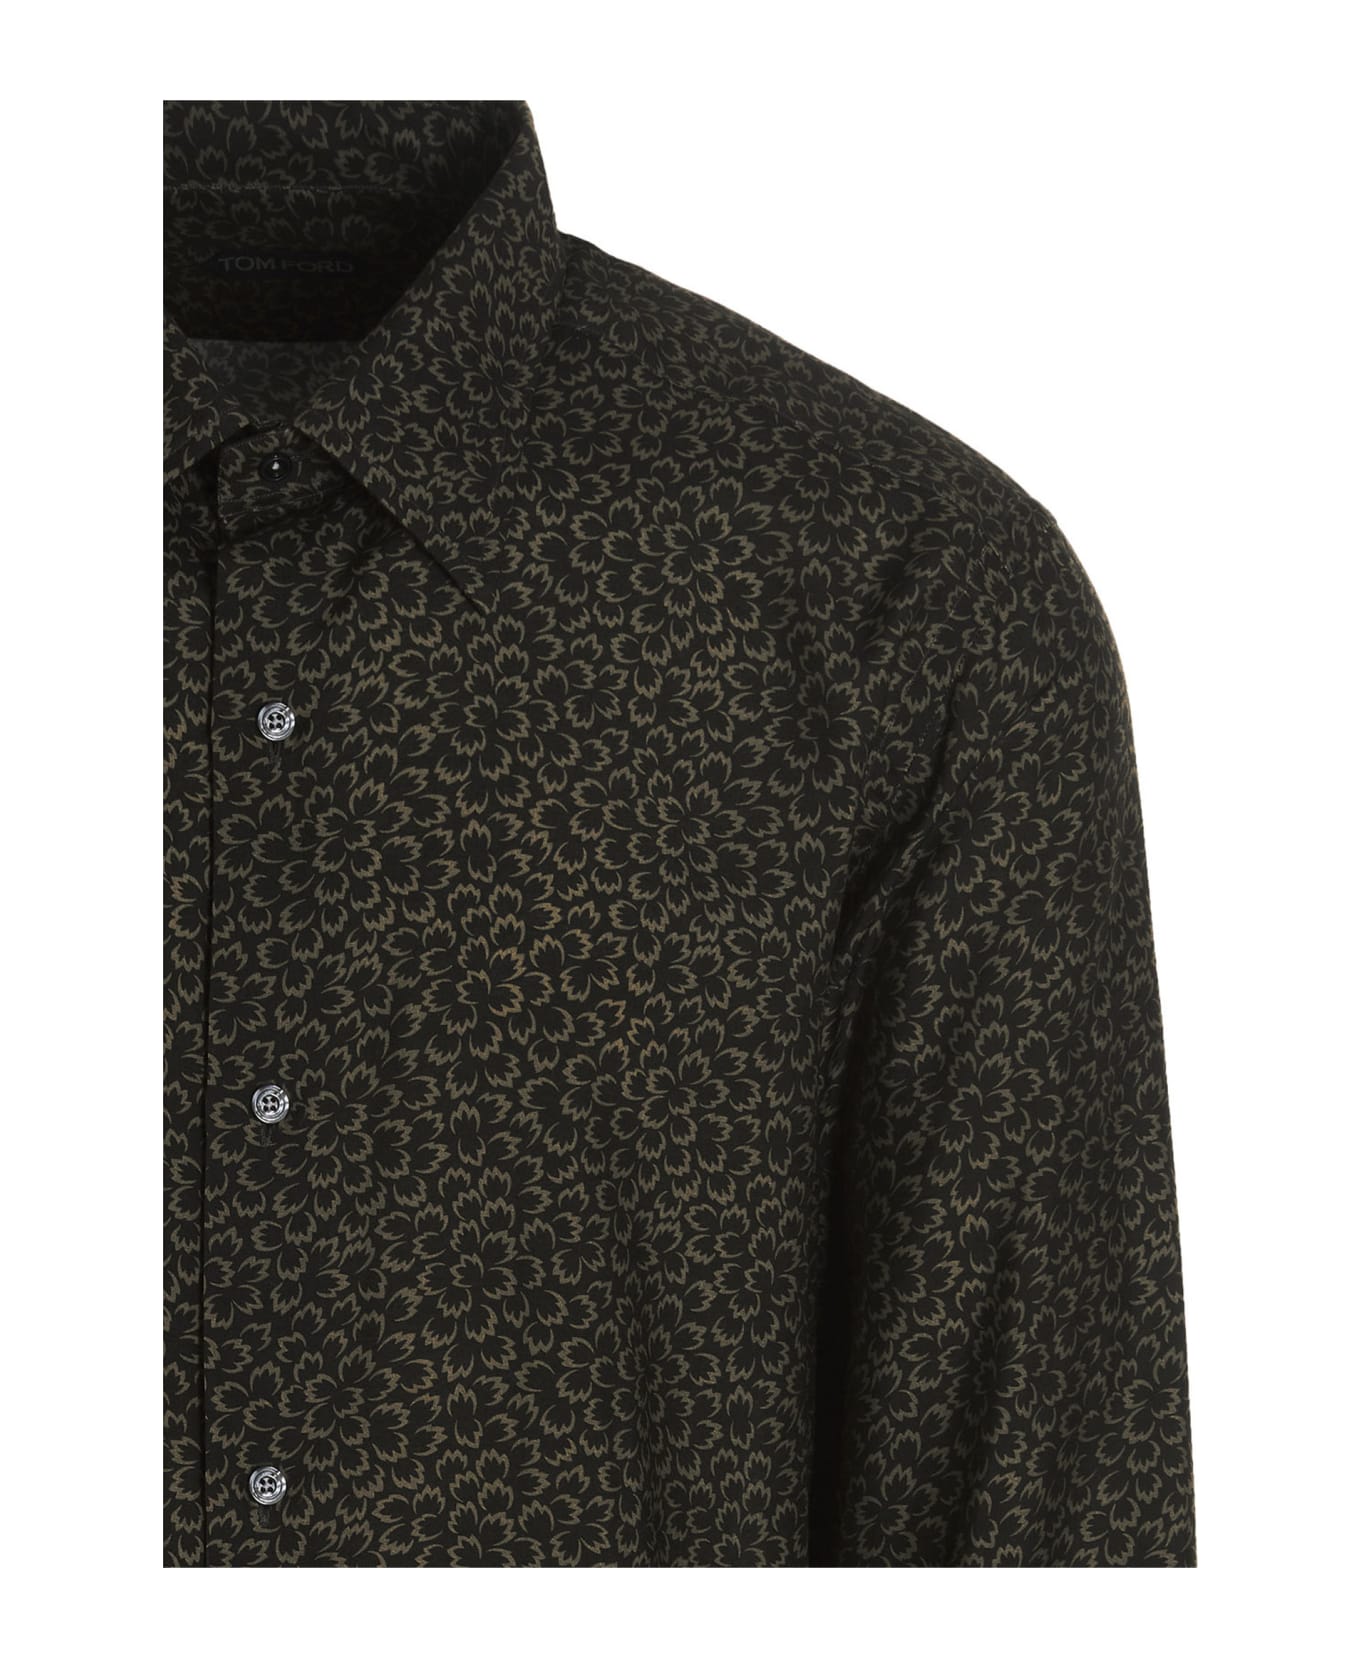 Tom Ford All Over Print Shirt - Multicolor